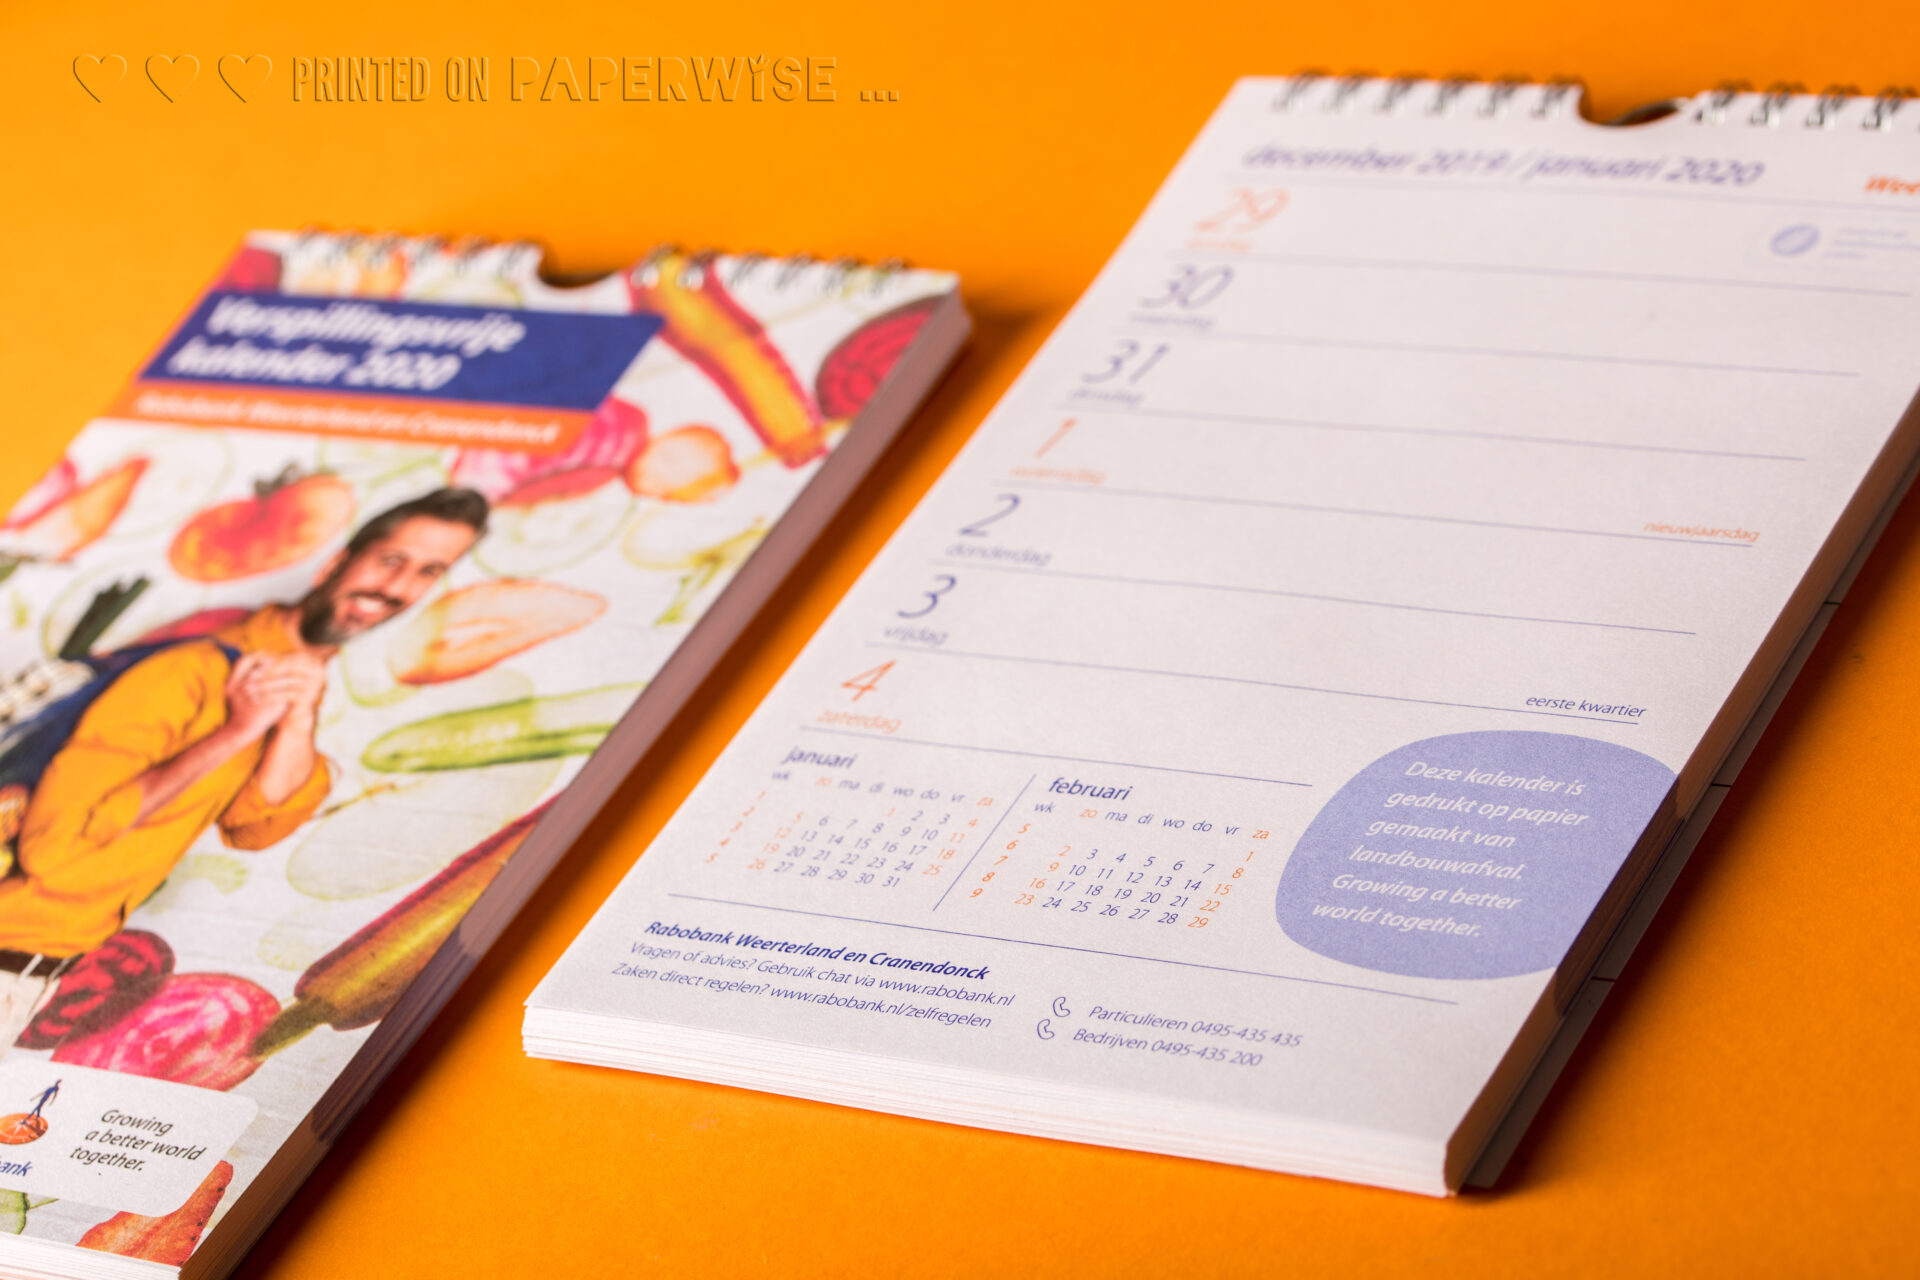 wp content uploads  0   0   socially responsible paper board sustainable stationery calenders agenda csr rabobank